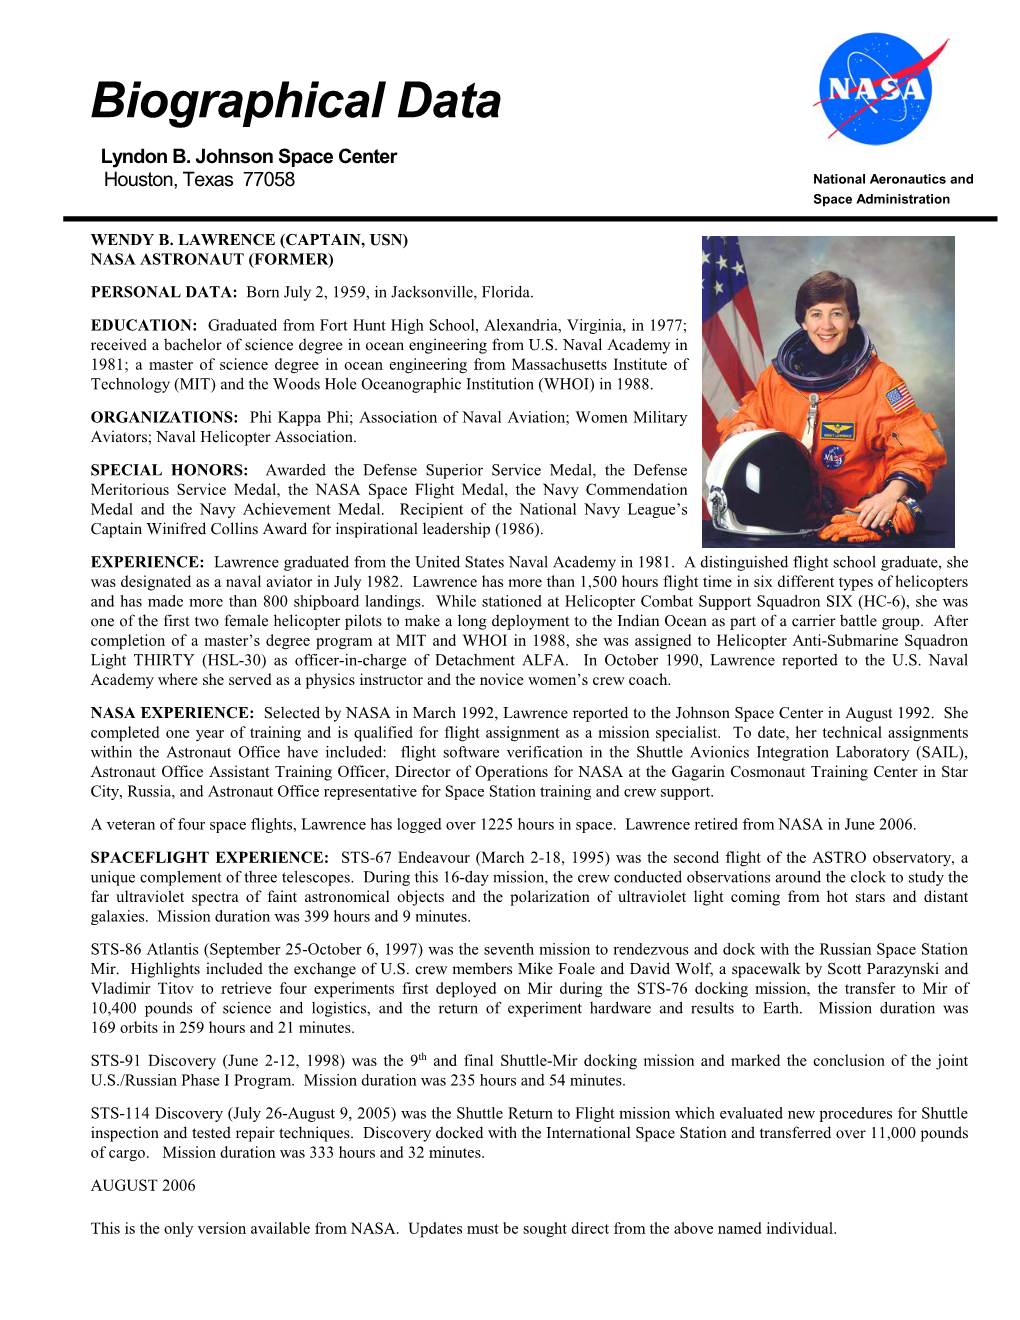 WENDY B. LAWRENCE (CAPTAIN, USN) NASA ASTRONAUT (FORMER) PERSONAL DATA: Born July 2, 1959, in Jacksonville, Florida